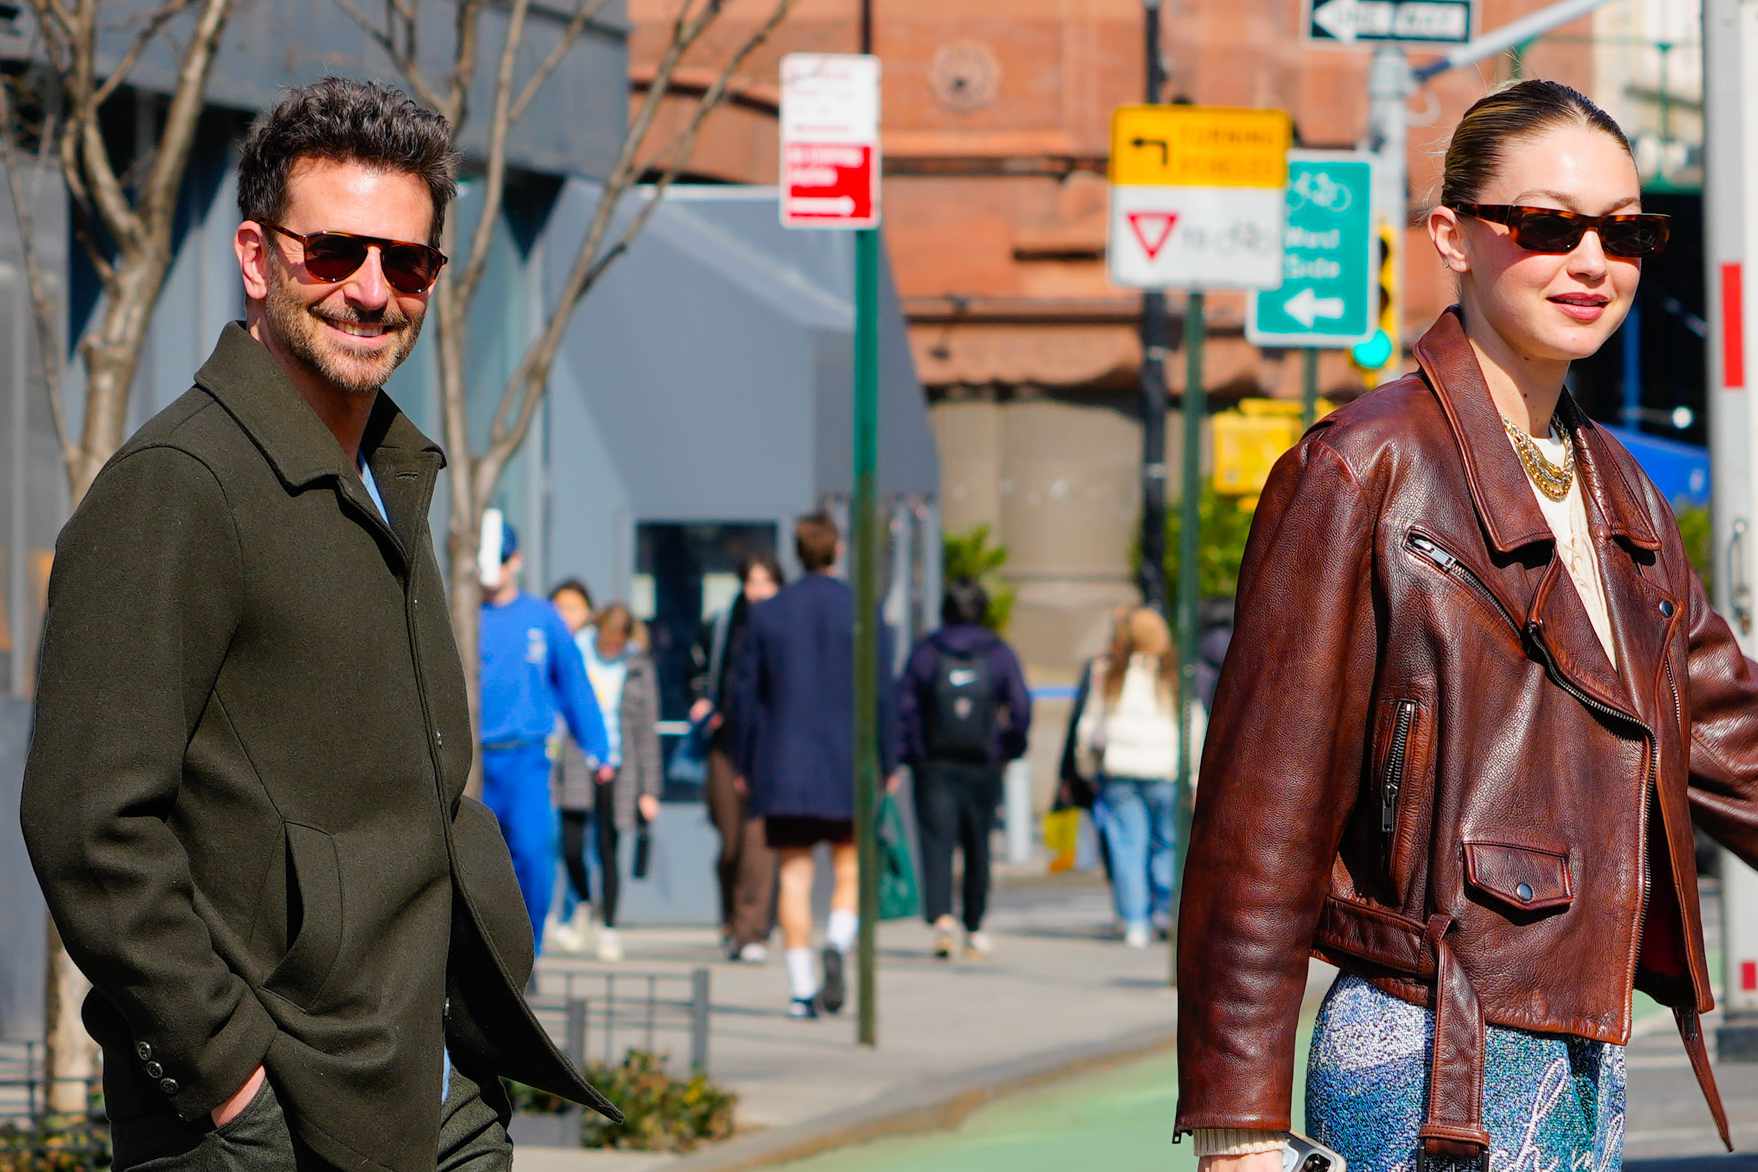 Bradley Cooper & Gigi Hadid seen out in New York wearing streetwear outfits